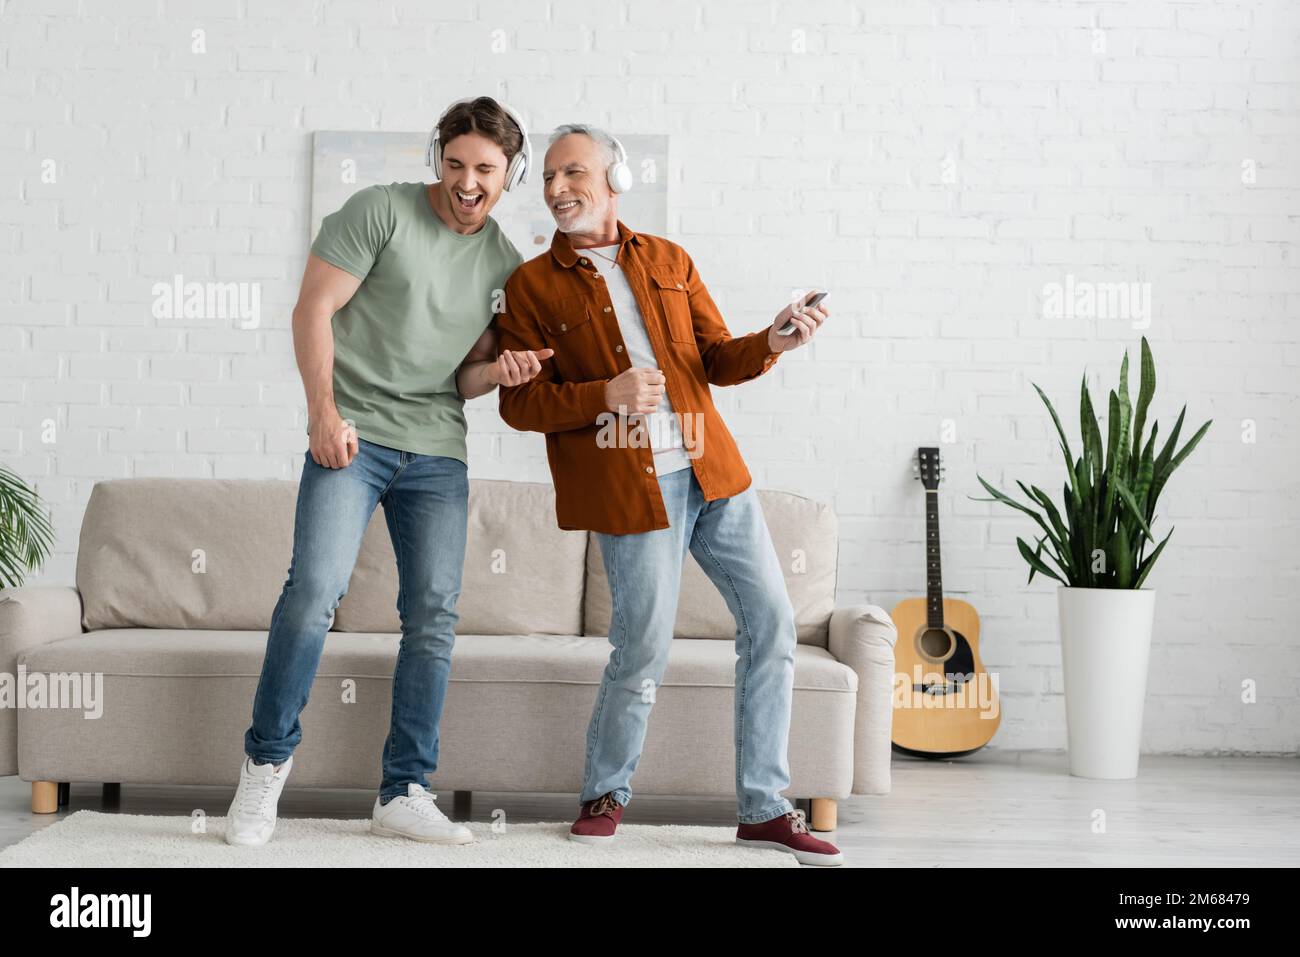 full length of joyful young man with mature dad in wireless headphones singing and dancing in living room,stock image Stock Photo